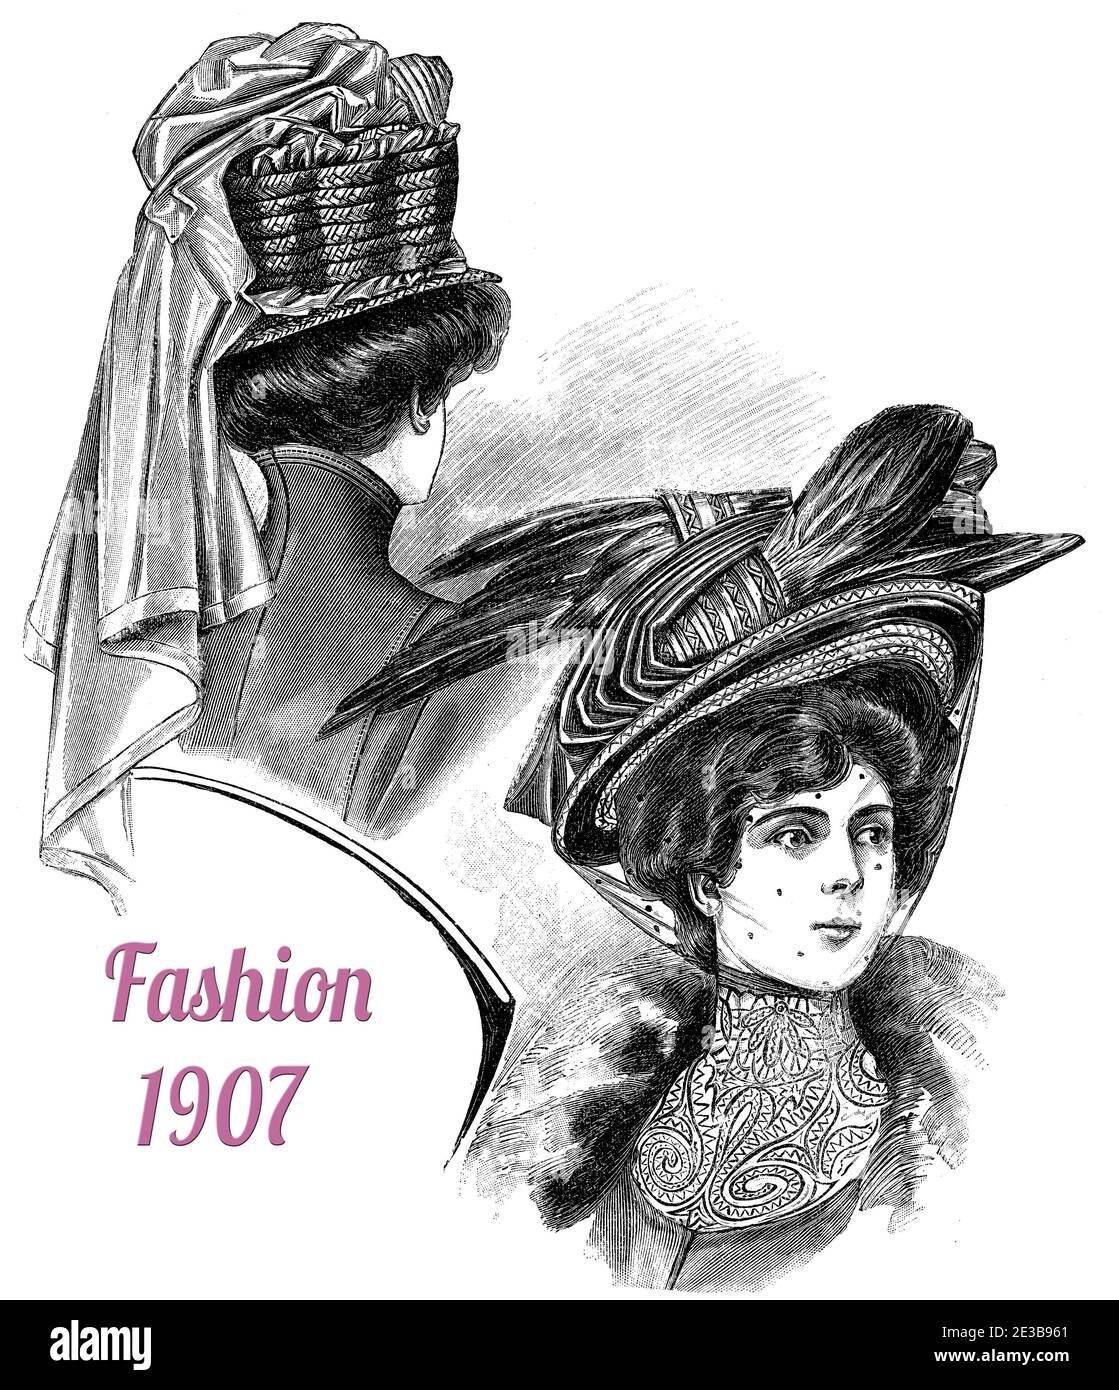 Ladies hat and hairdressing fashion 1907,  broad hats with feathers and elaborated ribbon construction, Gibson girl hairstyle with piled up hairs, high neck blouse, laces and coat with fur collar Stock Photo